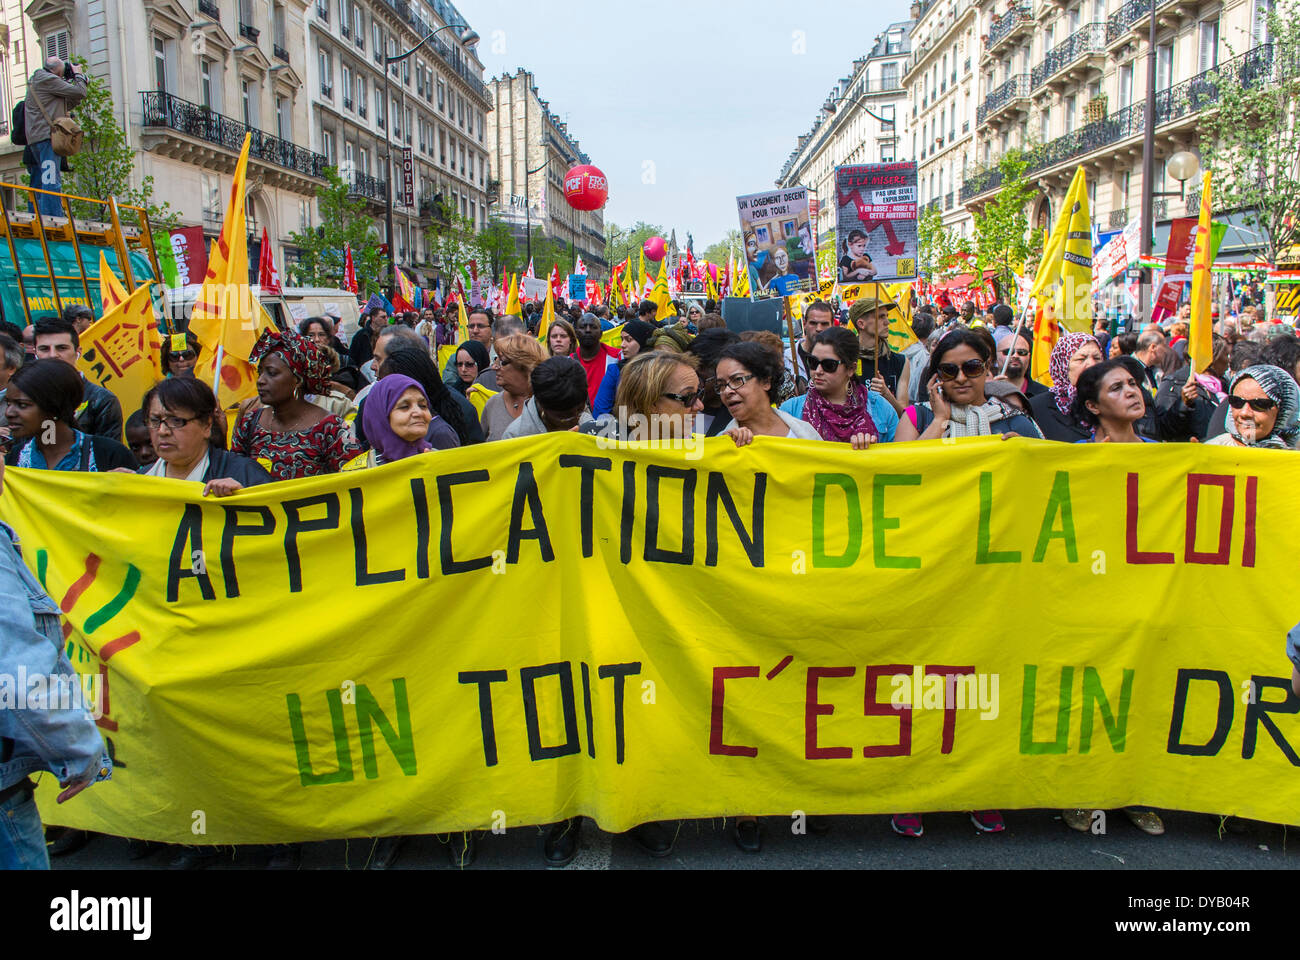 Paris, France, French Political Left Demonstration A-gainst Economic Austerity by the Government, Front de Gauche,  'Sans Papiers', Migrants without Papers marching with Protest banners, social justice slogans, protest support immigration rights, france migrant protests Stock Photo